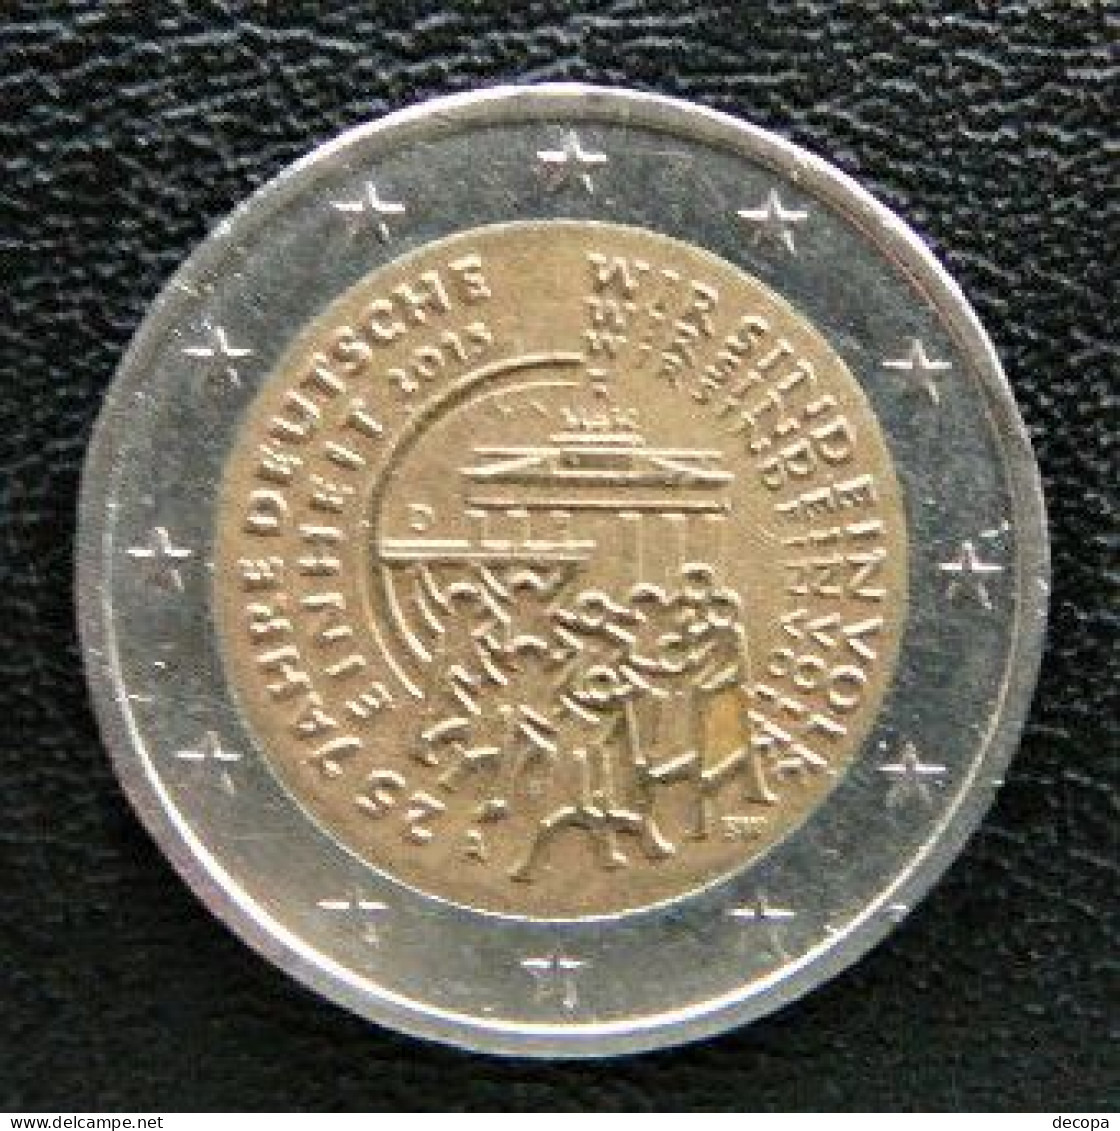 Germany - Allemagne - Duitsland   2 EURO 2015  A      Speciale Uitgave - Commemorative - Alemania